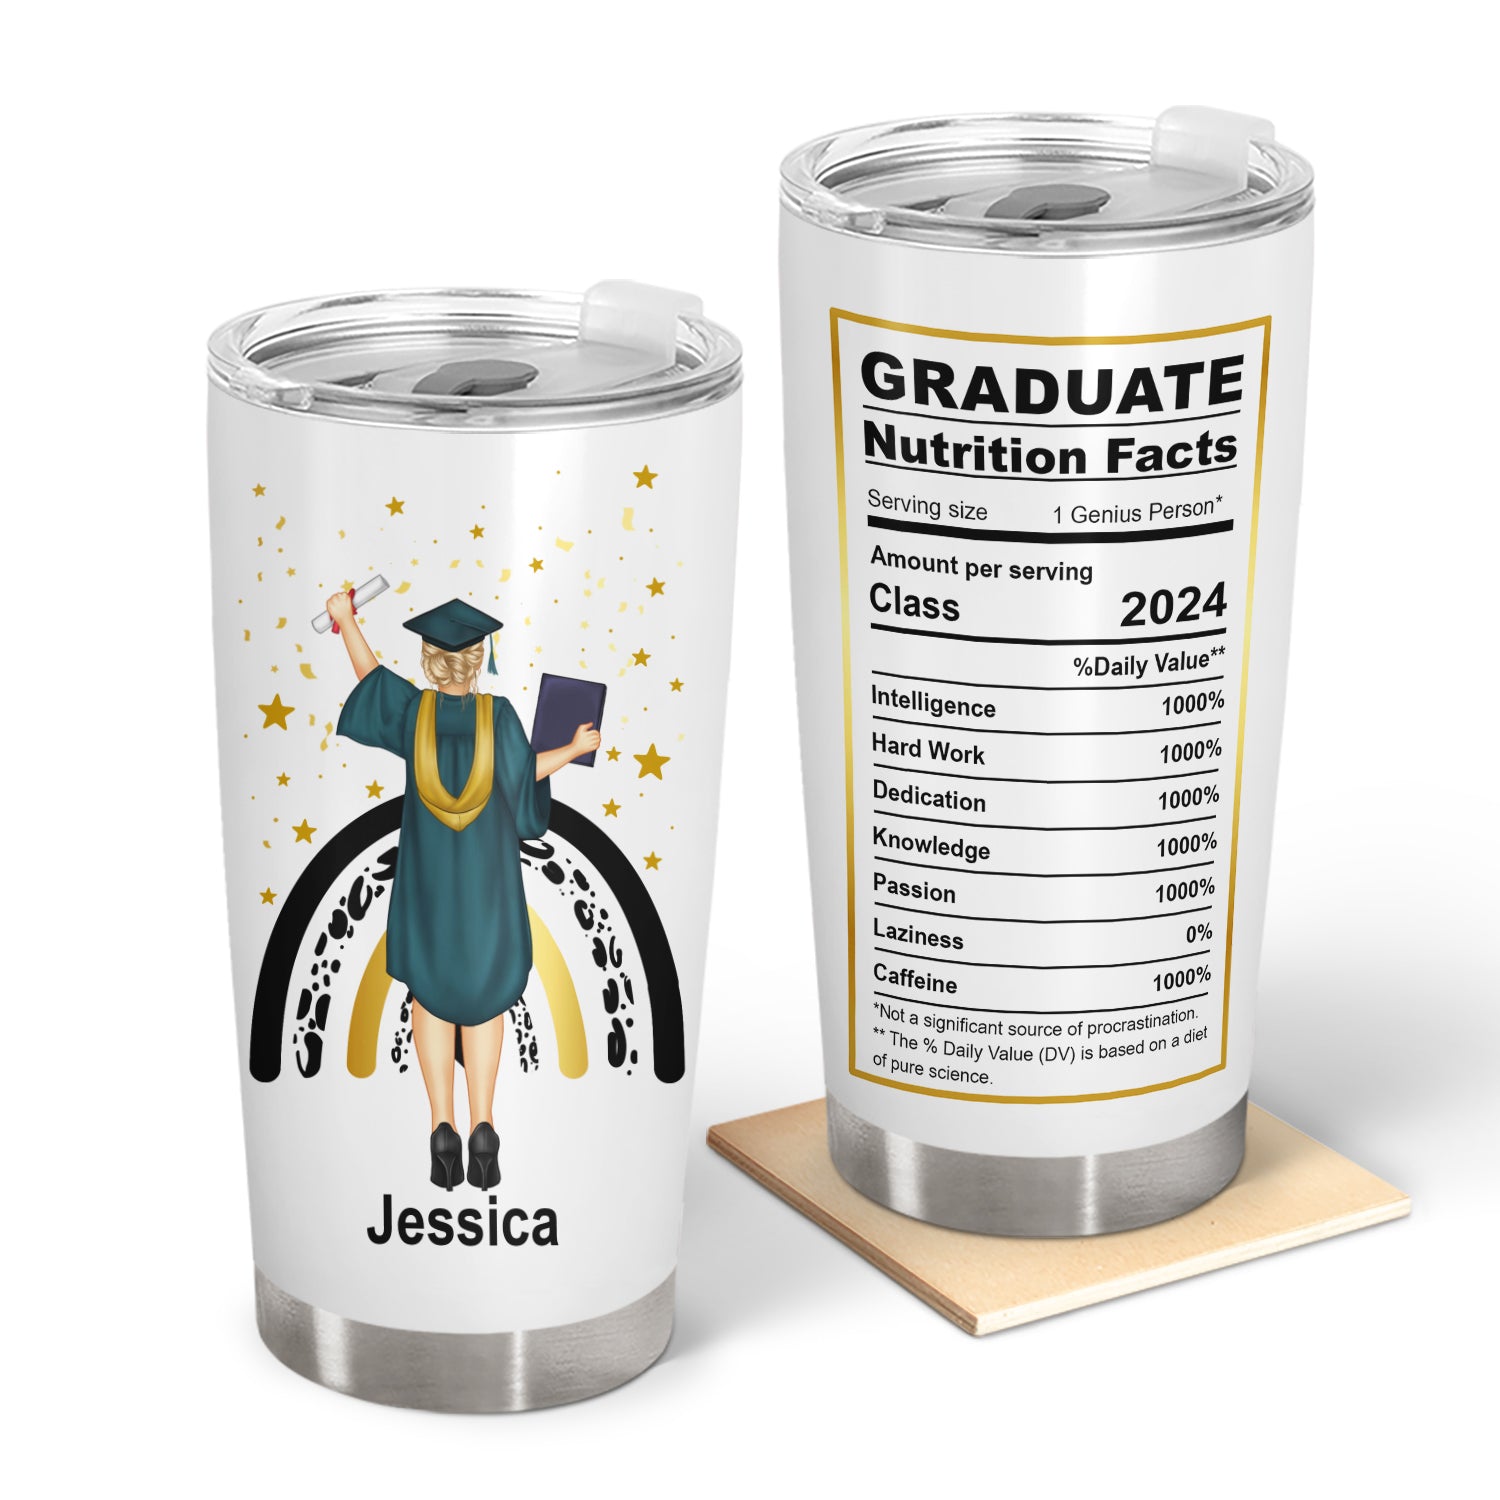 Graduate Nutrition Facts - Graduation Gift - Personalized Tumbler